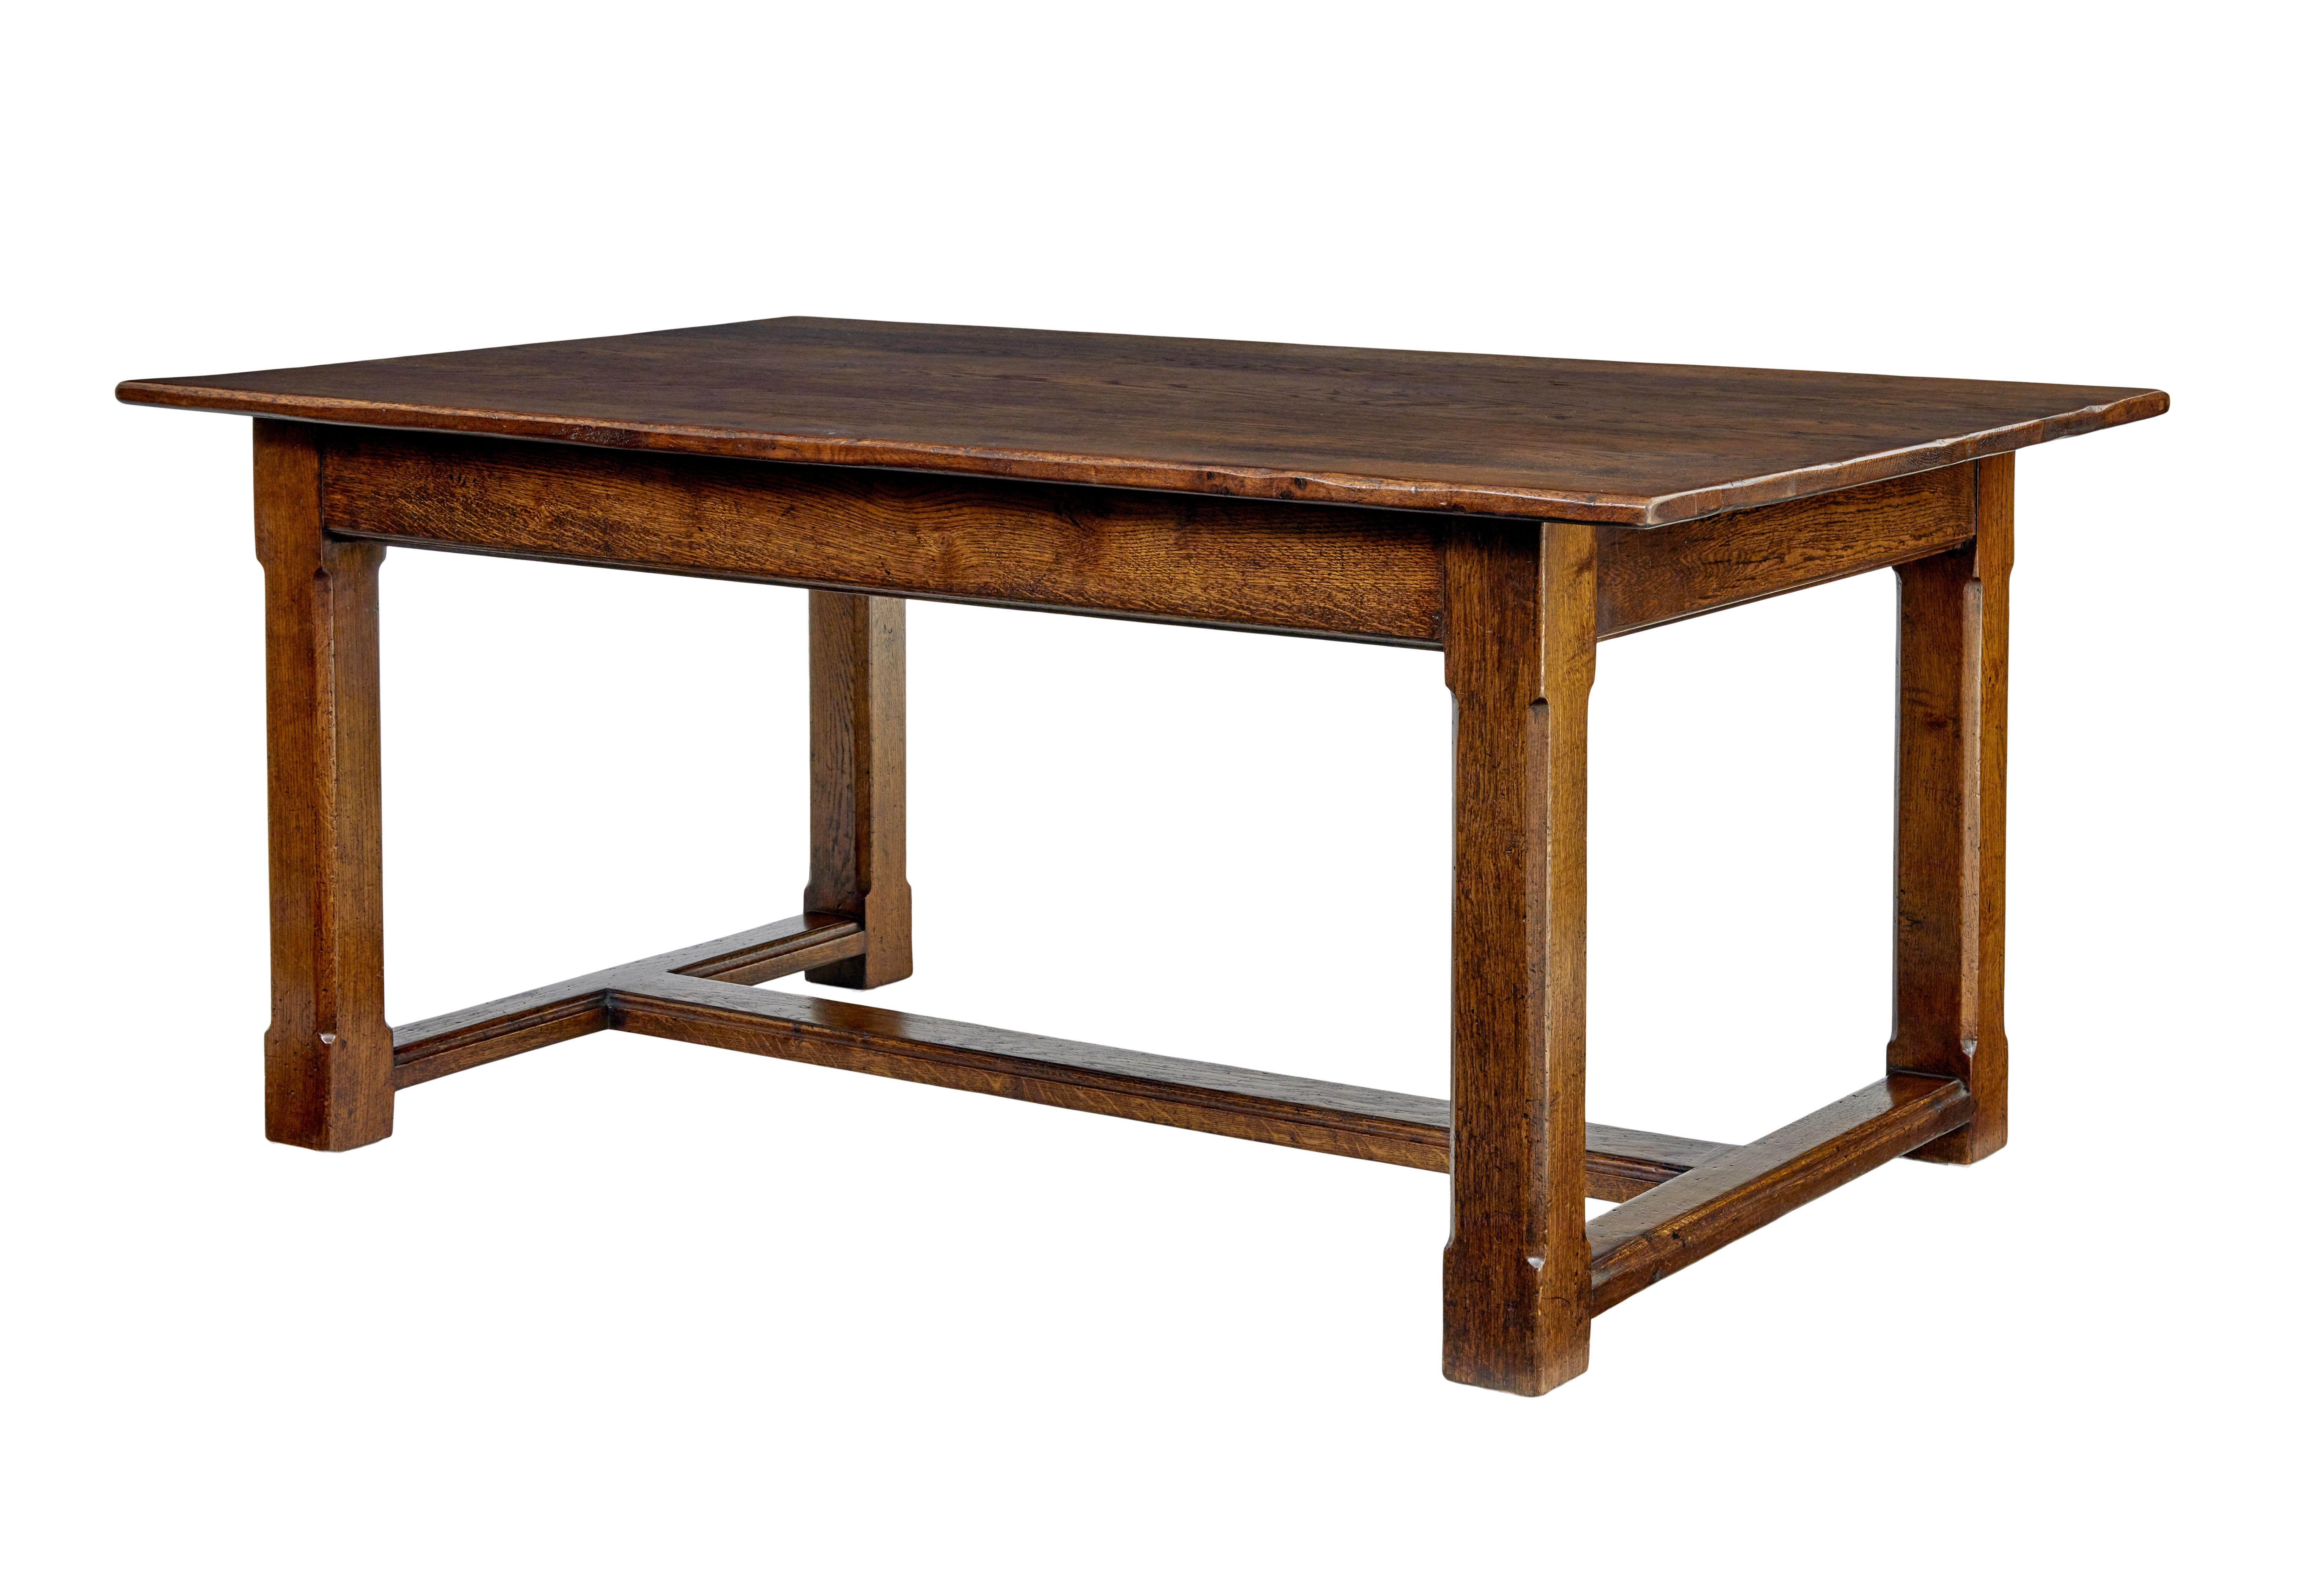 Late 20th century solid oak refectory table circa 1990.

Good quality English made oak refectory table made from seasoned oak. 7 plank oak top, standing on a straight leg base with fluted detail, united by h frame stretcher.

Very good size for use